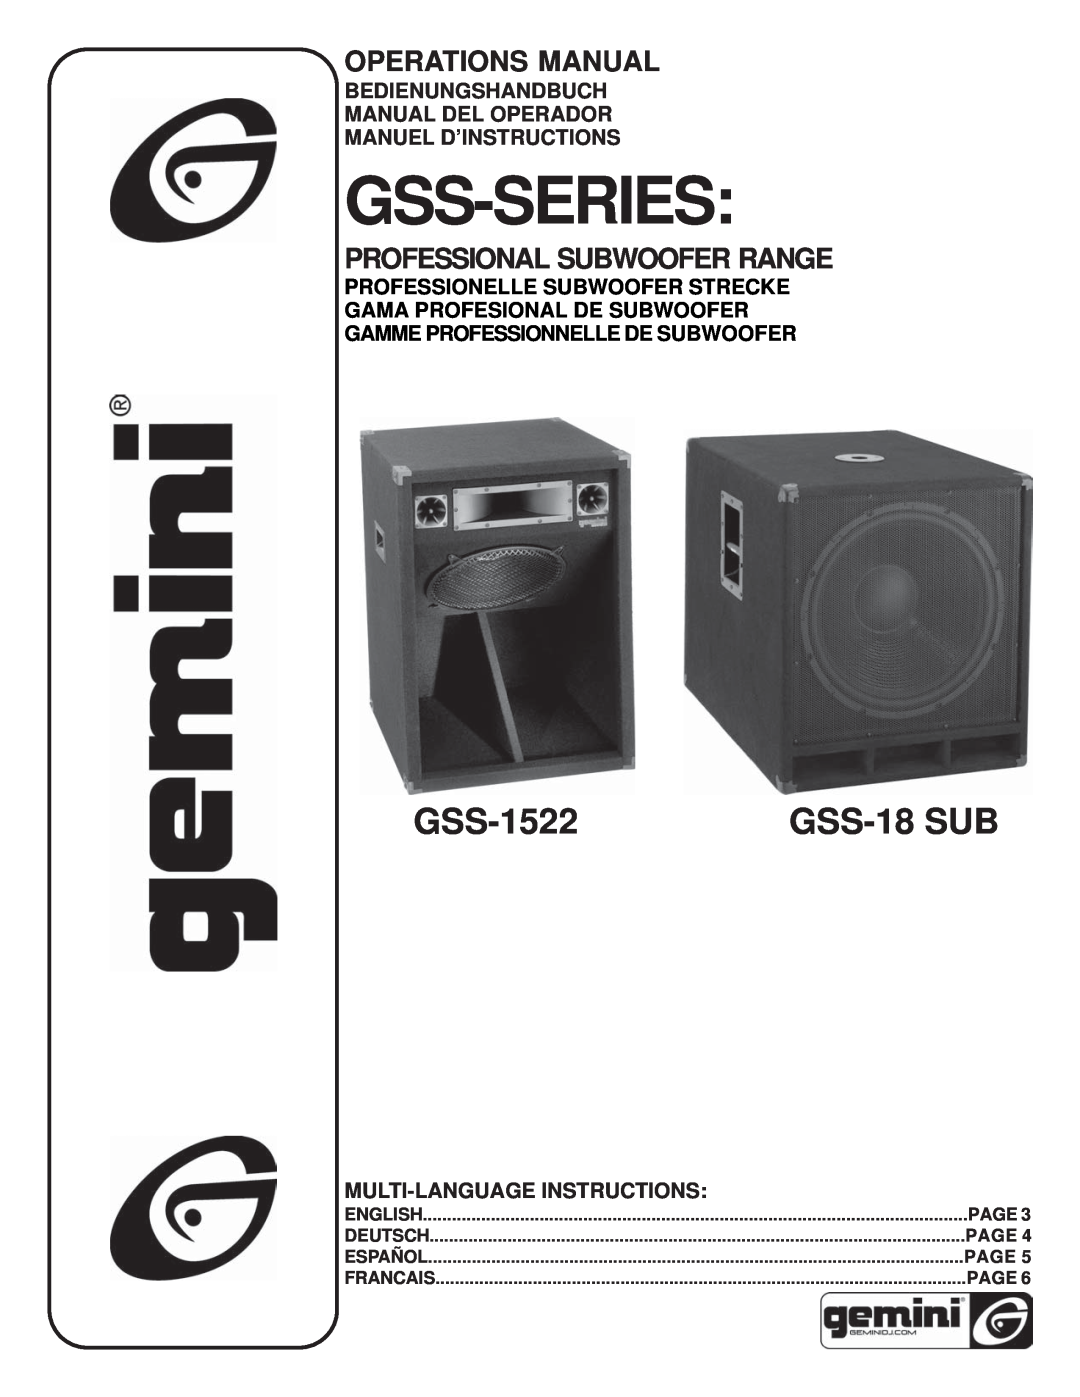 Gemini GSS-1522 manual Gss-Series, GSS-18SUB, Operations Manual, Professional Subwoofer Range, Page, English, Deutsch 